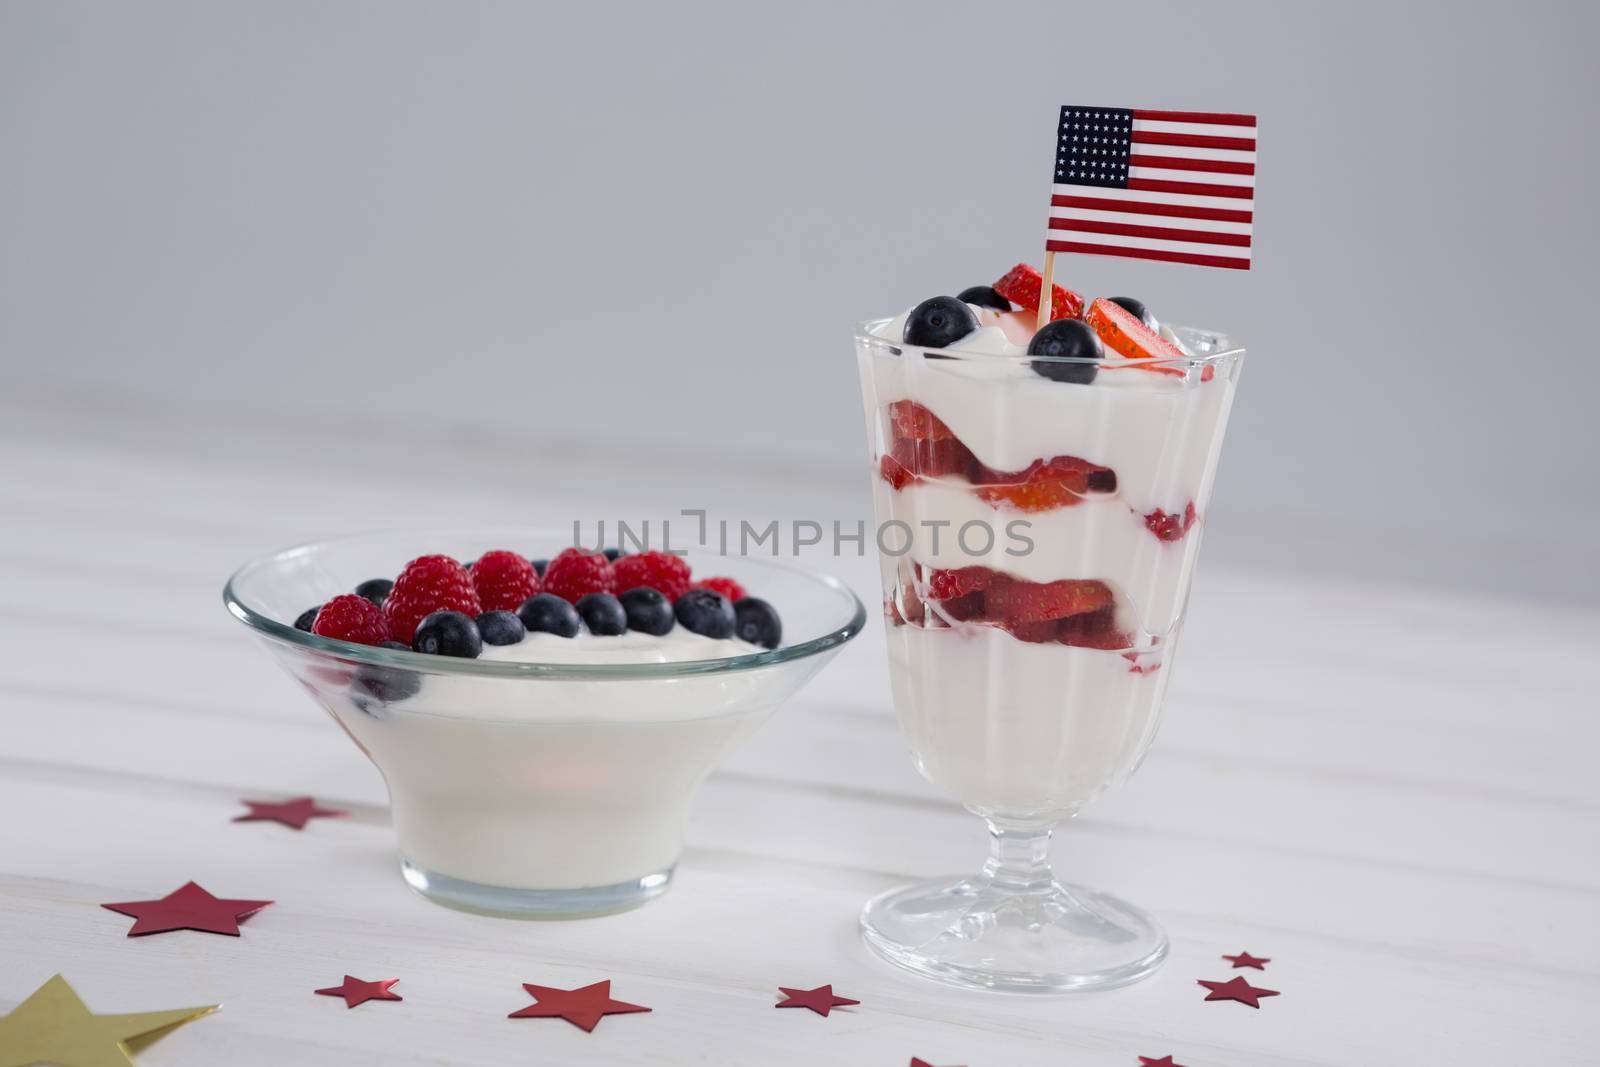 Fruit ice cream with 4th july theme on wooden table